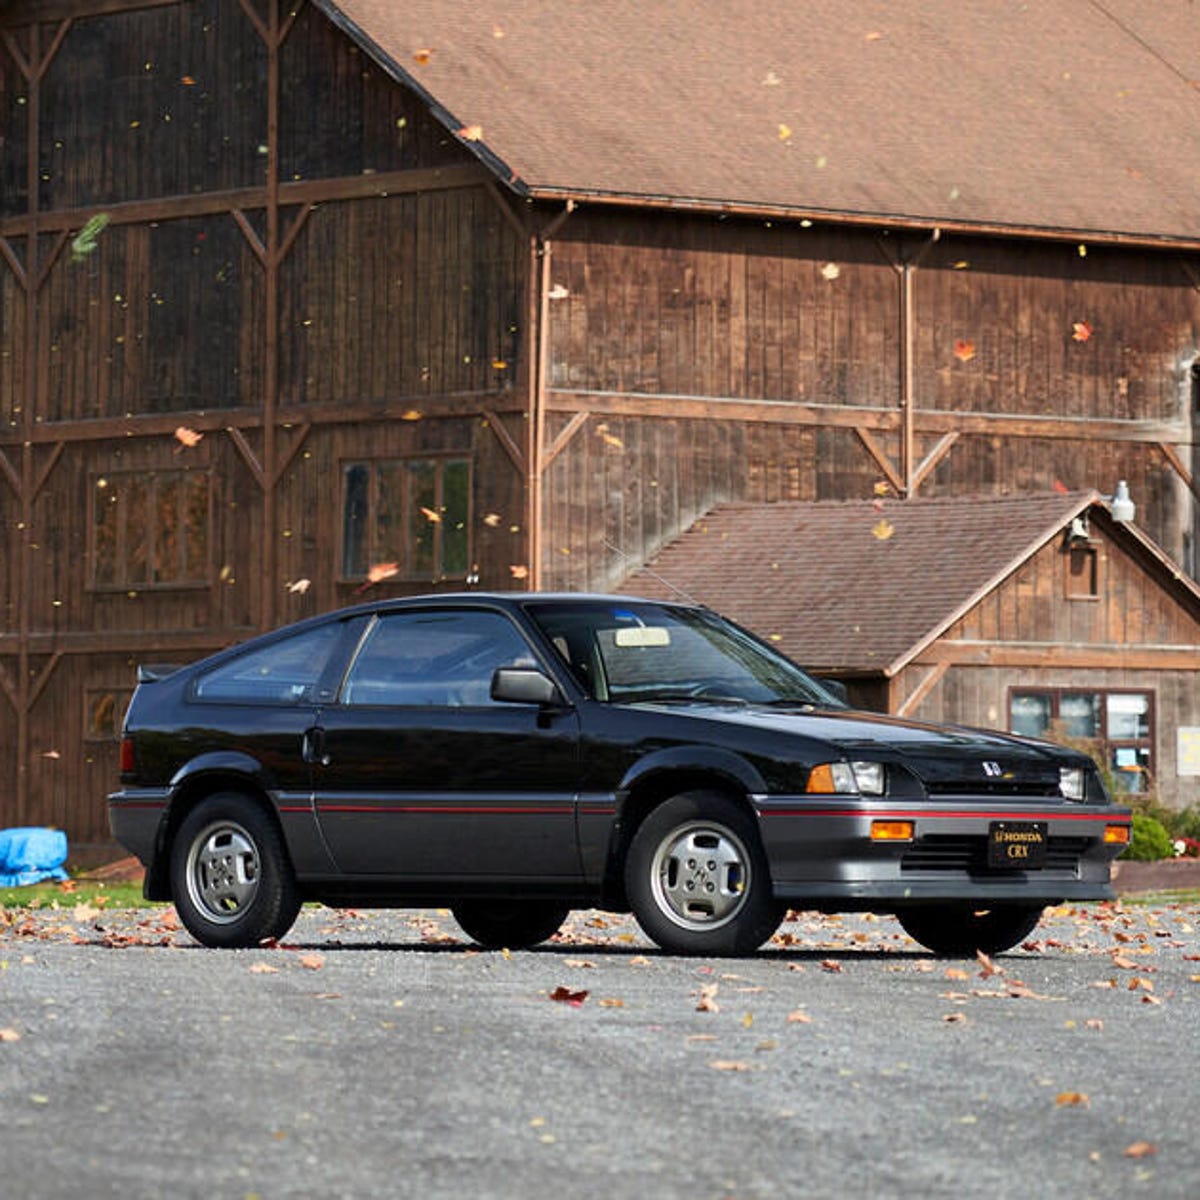 1985 Honda CRX Si review: The ultimate palate cleanser - CNET